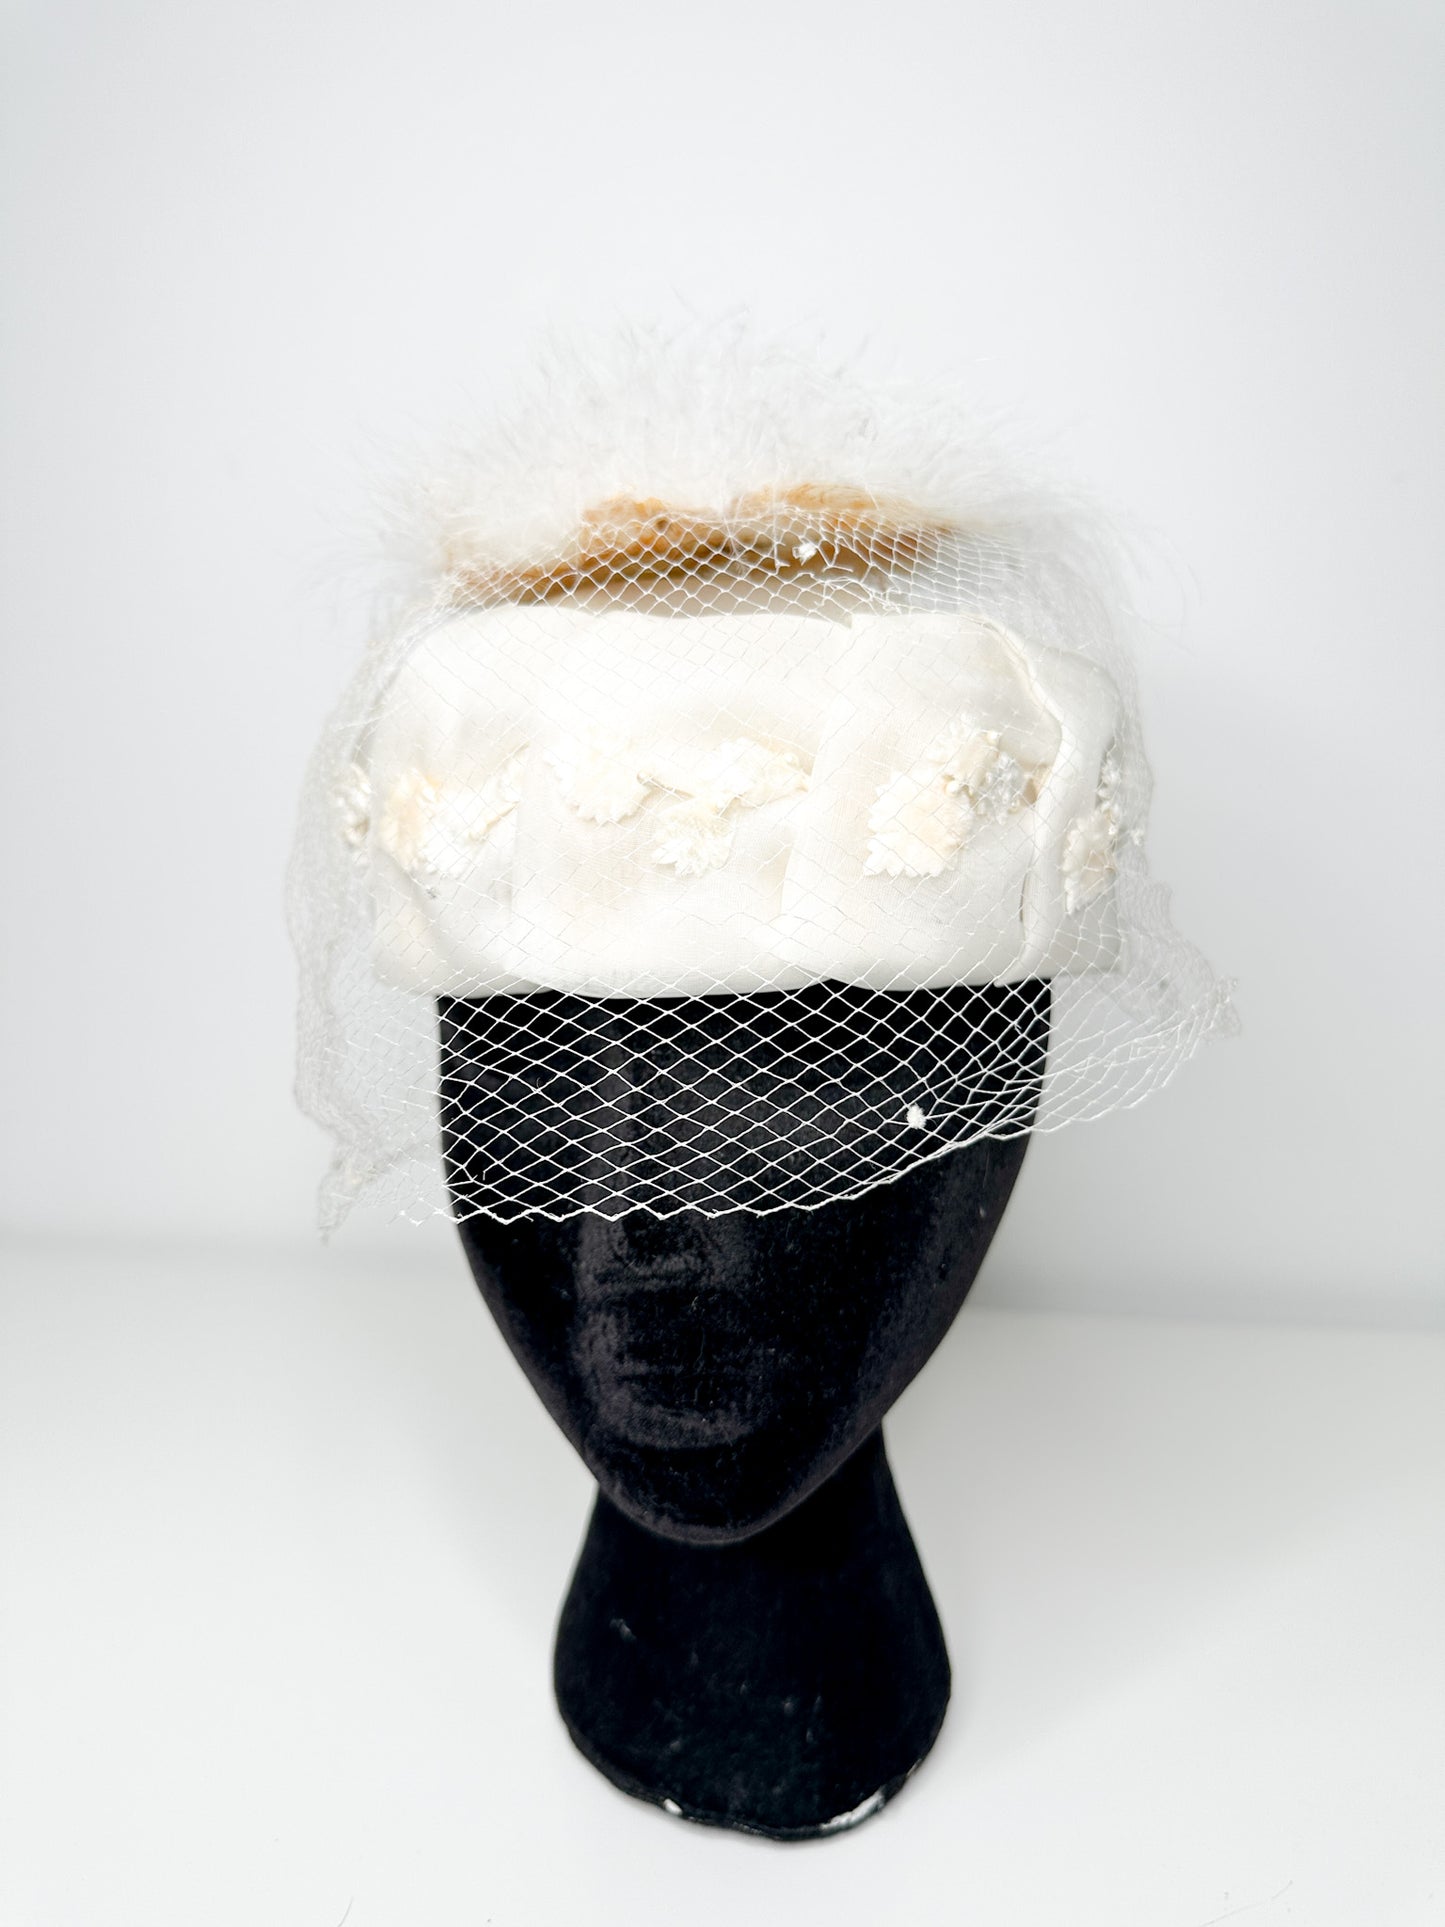 Vintage White Velvet Veiled Wedding Hat with Feather Detail |Veiled Vintage Woven Pill box Hat | 1960s rounded hat